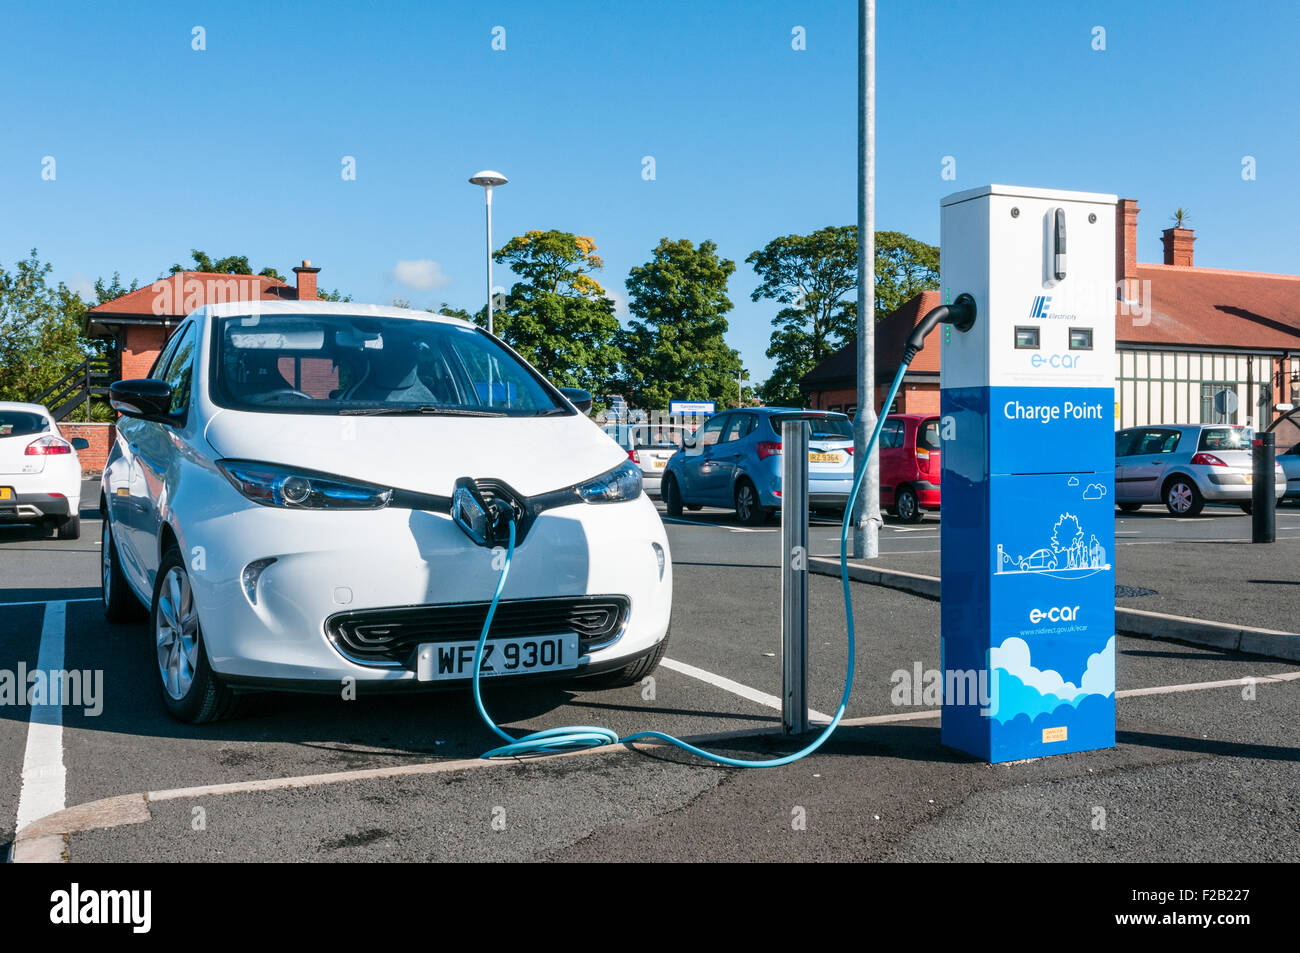 A Renault Zoe electric car is recharged from a Northern Ireland Electricity charging station in a car park Stock Photo